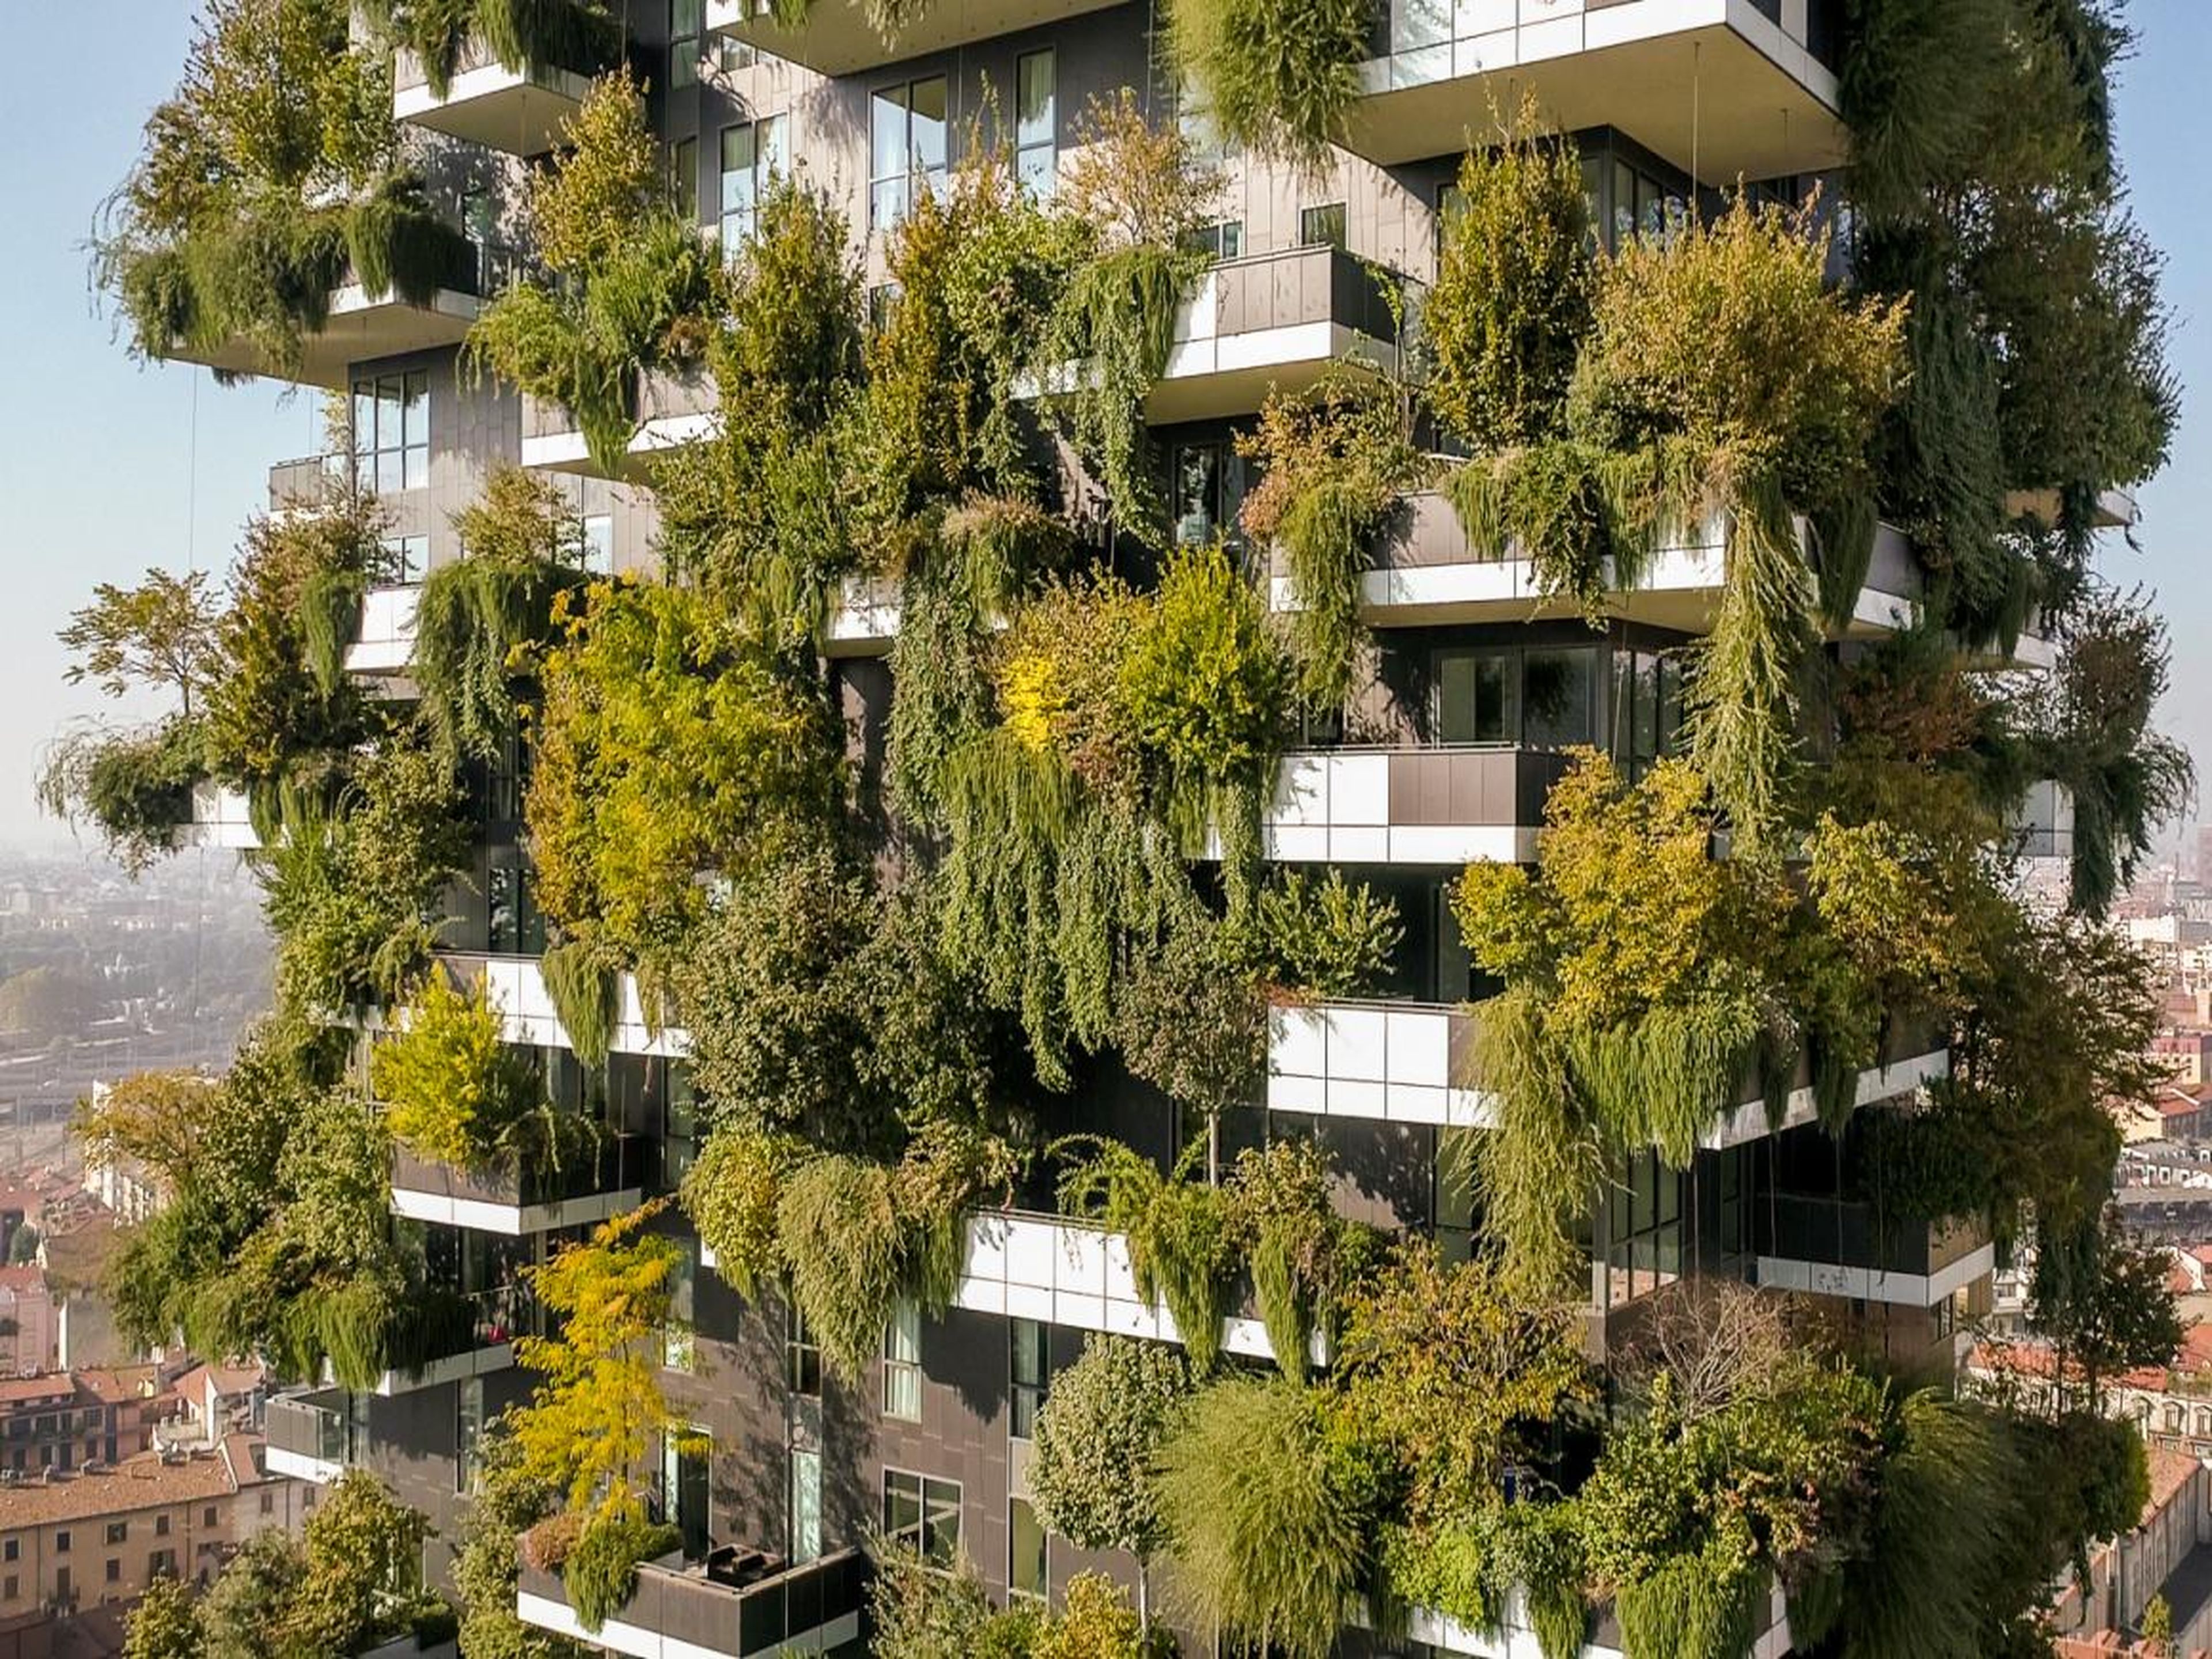 Plants on the outside of the building help reduce smog in the air and regulate indoor temperatures.